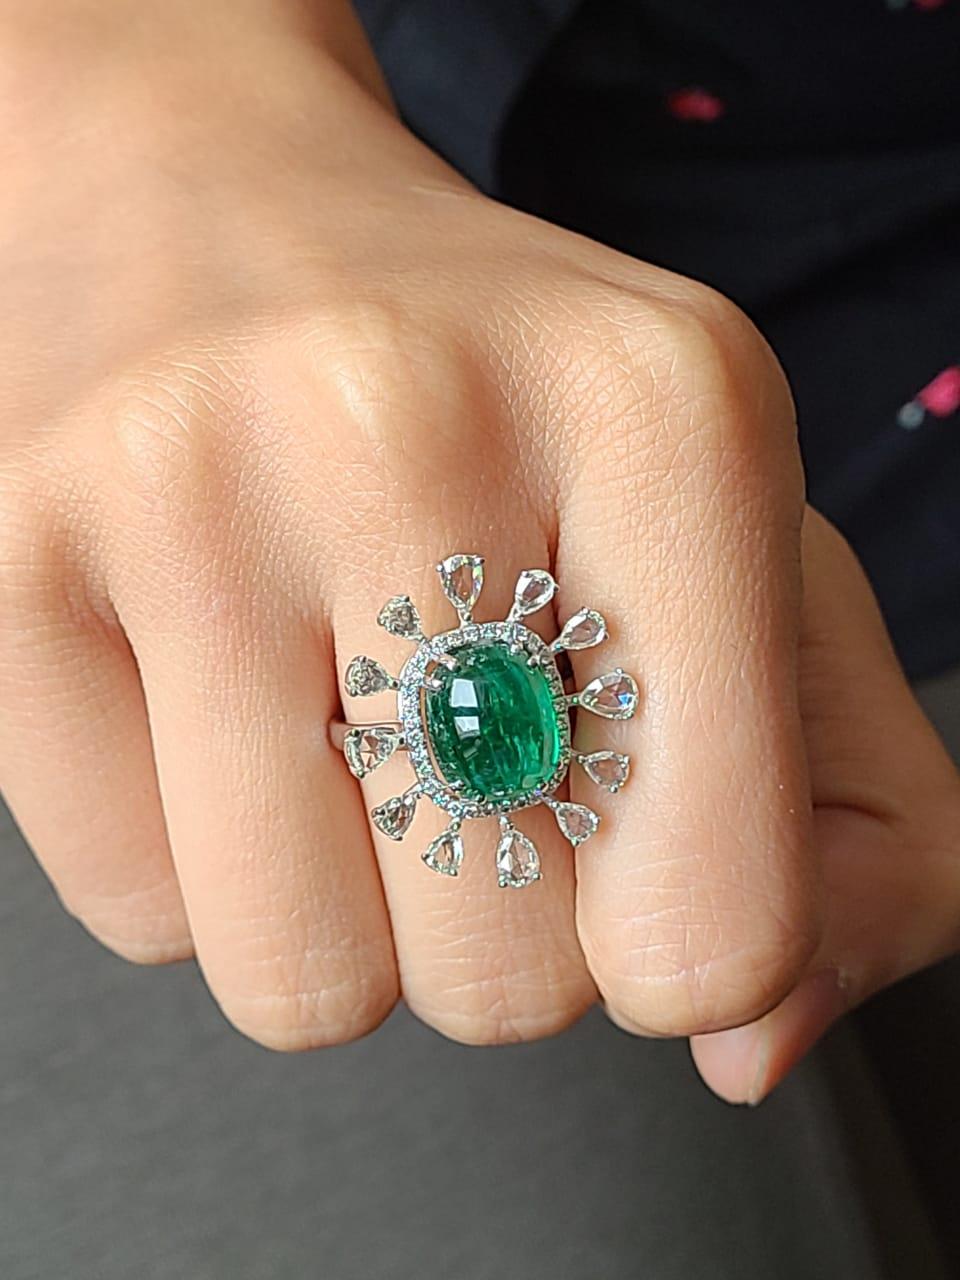 A beautiful cocktail ring set in 18k white gold set with natural emerald and diamond. The emerald weight is 6.40 carats and diamond weight is 1.48 carats. The net gold weight is 6.109 grams and ring dimensions in cm 2.5 x 2.5 x 2.5 (LXWXH). US size